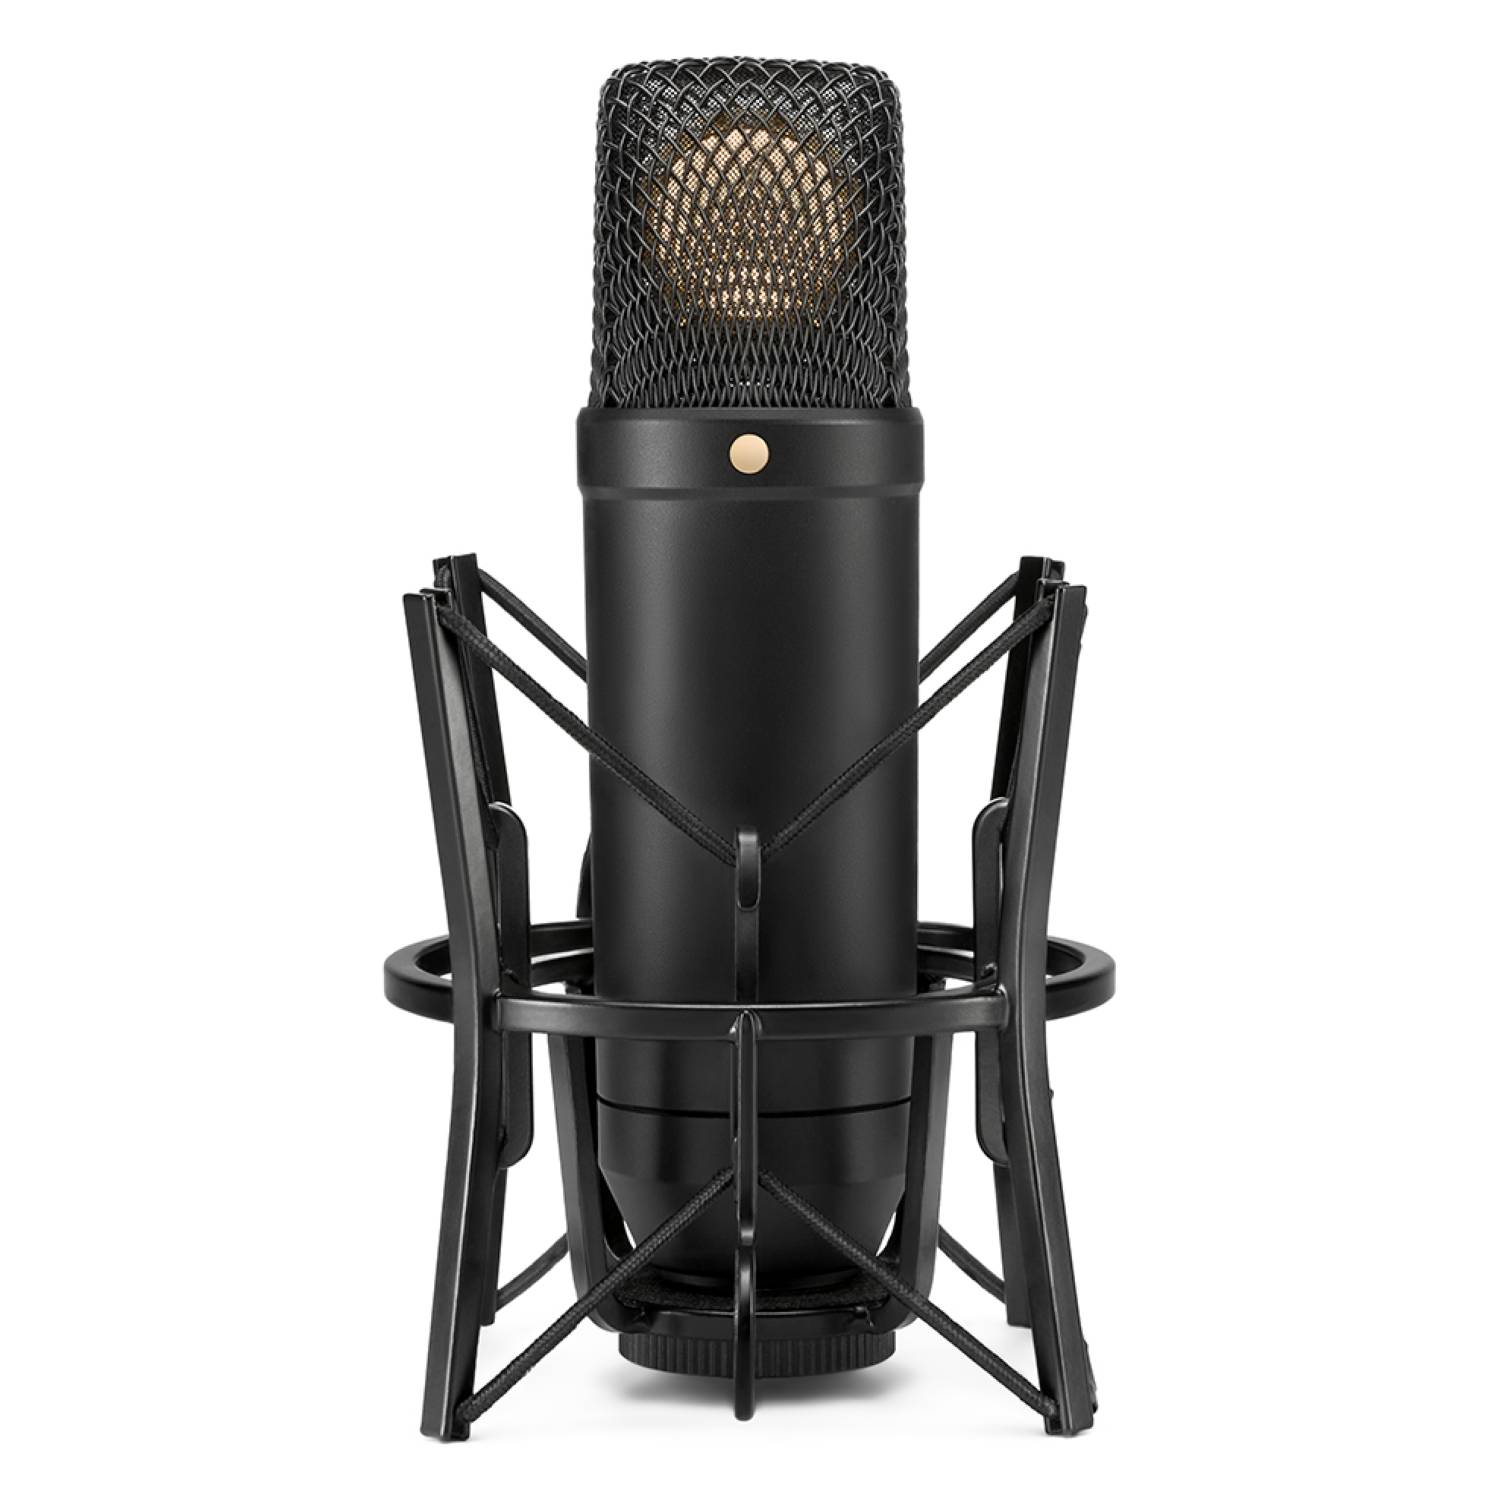 RODE NT1-KIT Large-Diaphragm Cardioid Condenser Microphone